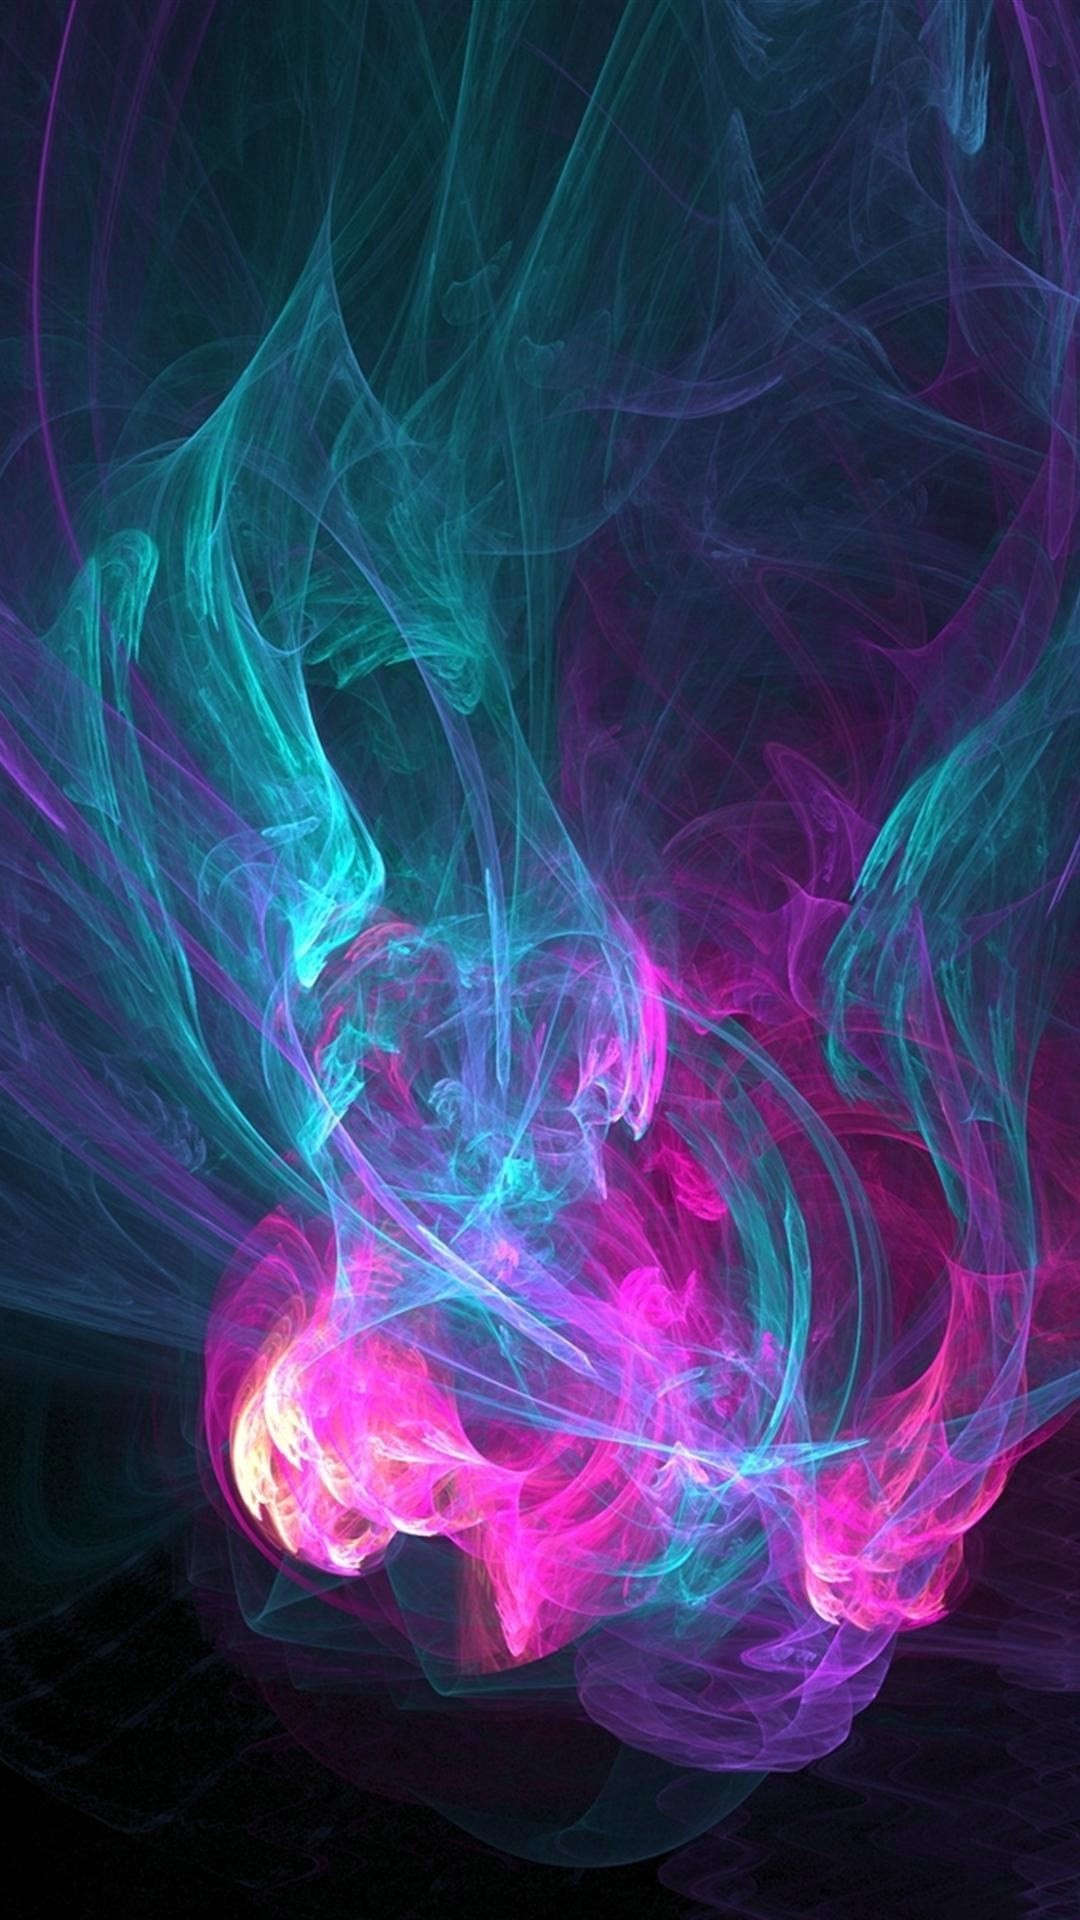 1080x1920 abstract cool pink iphone wallpaper